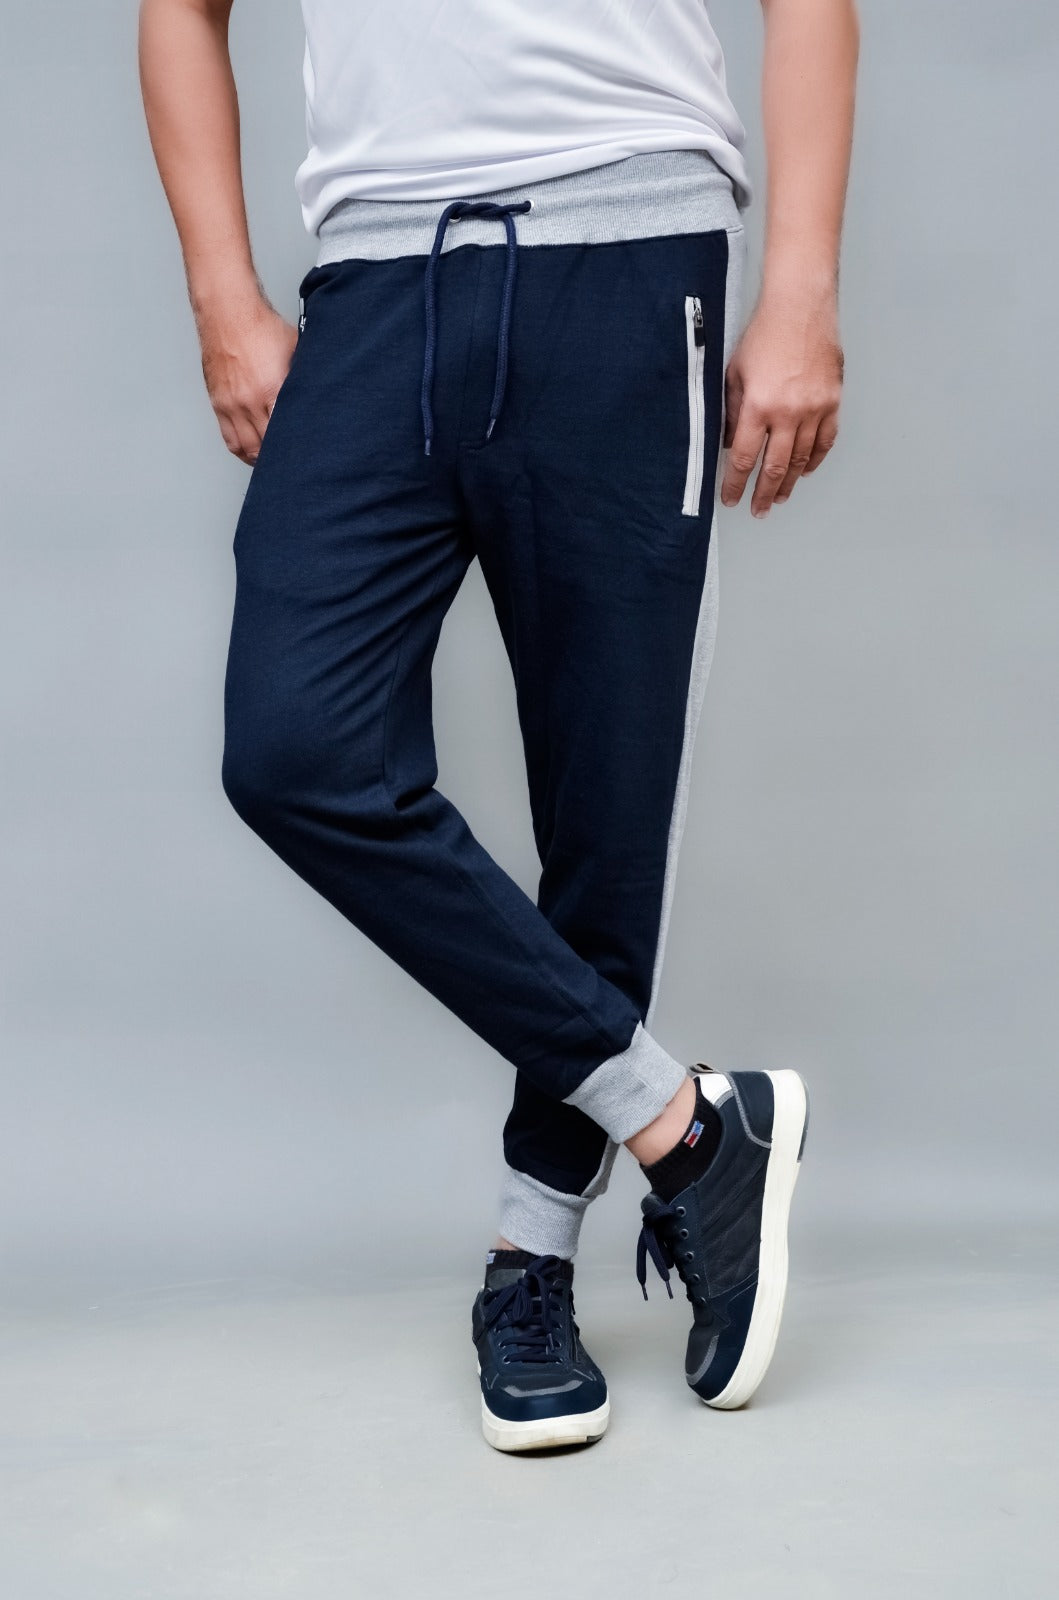 Navyblue with Grey Trouser